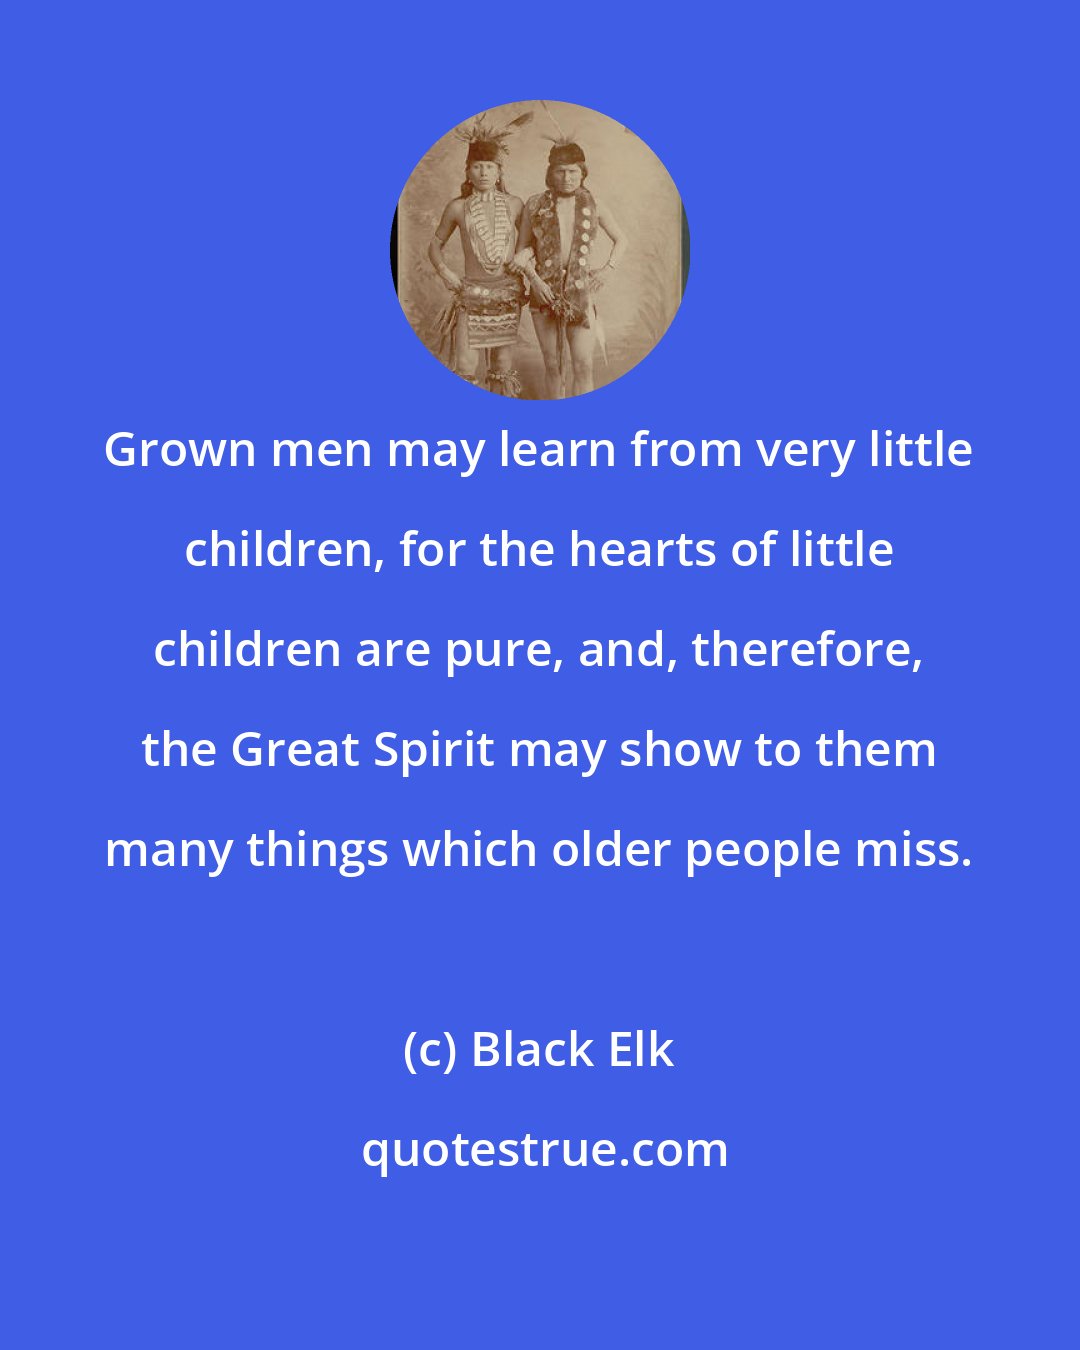 Black Elk: Grown men may learn from very little children, for the hearts of little children are pure, and, therefore, the Great Spirit may show to them many things which older people miss.